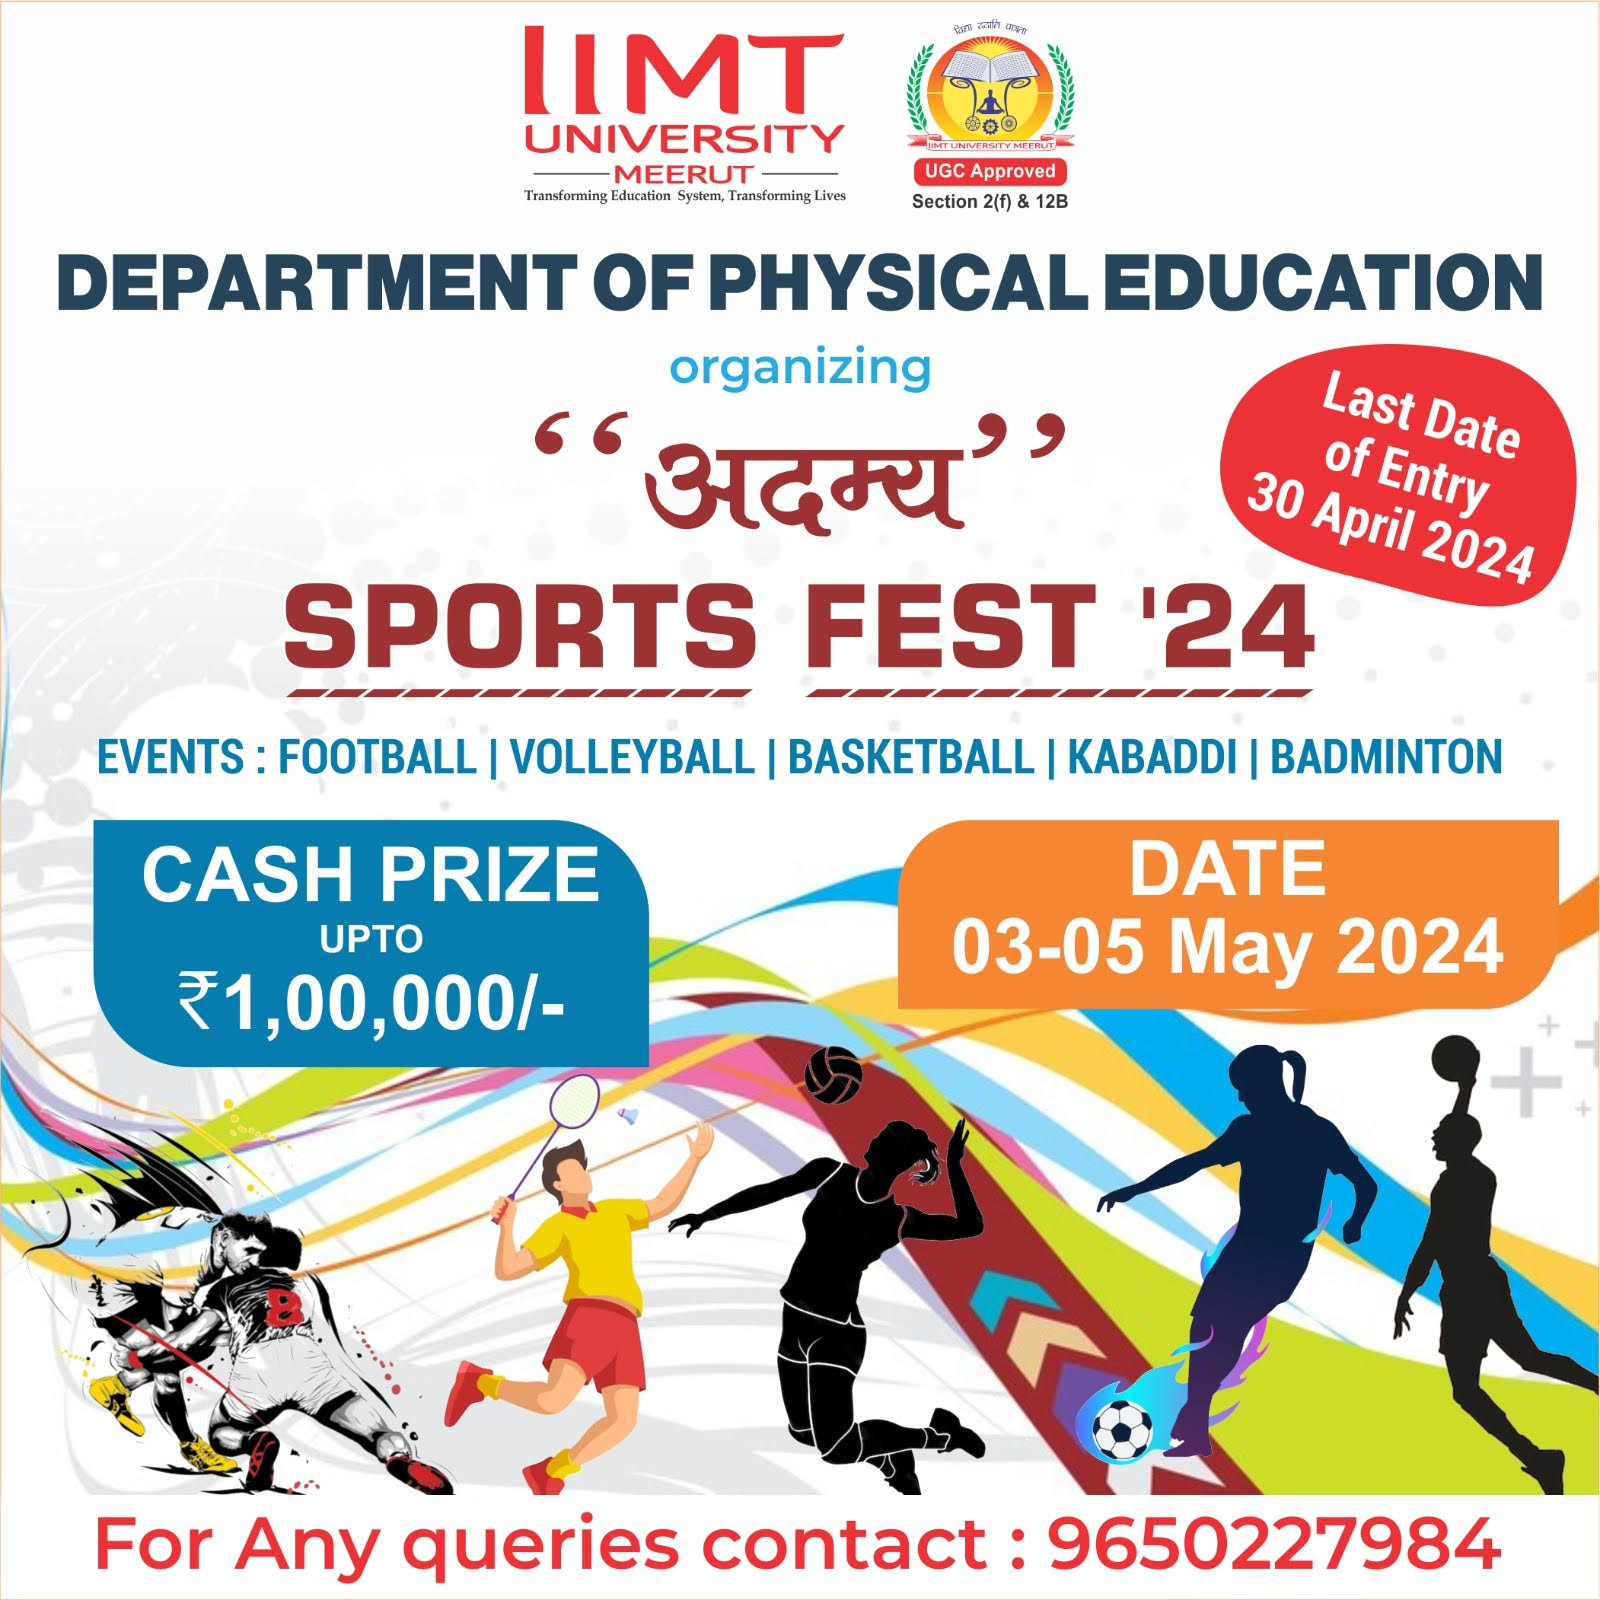 Invitation to Sports Fest: Join Us for “अदम्य”